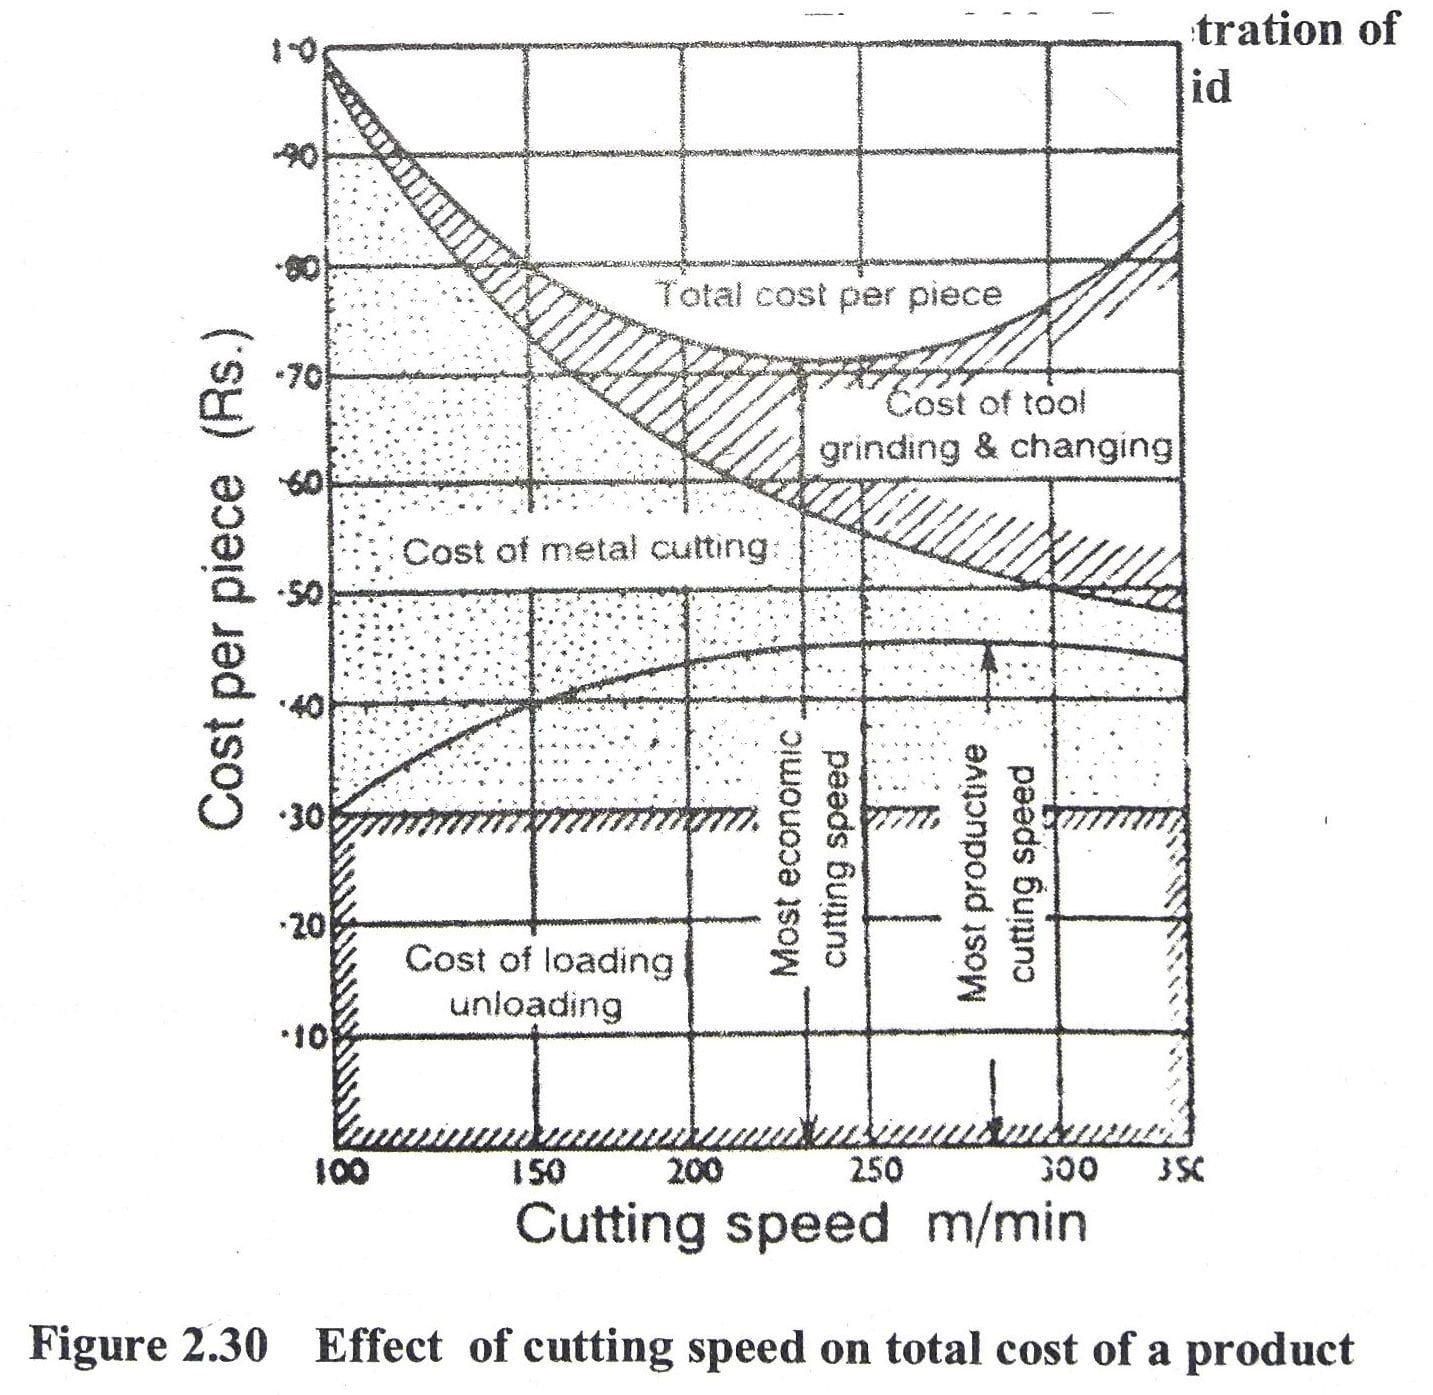 Cutting Fluids : Cutting speed vs Total Cost of a product